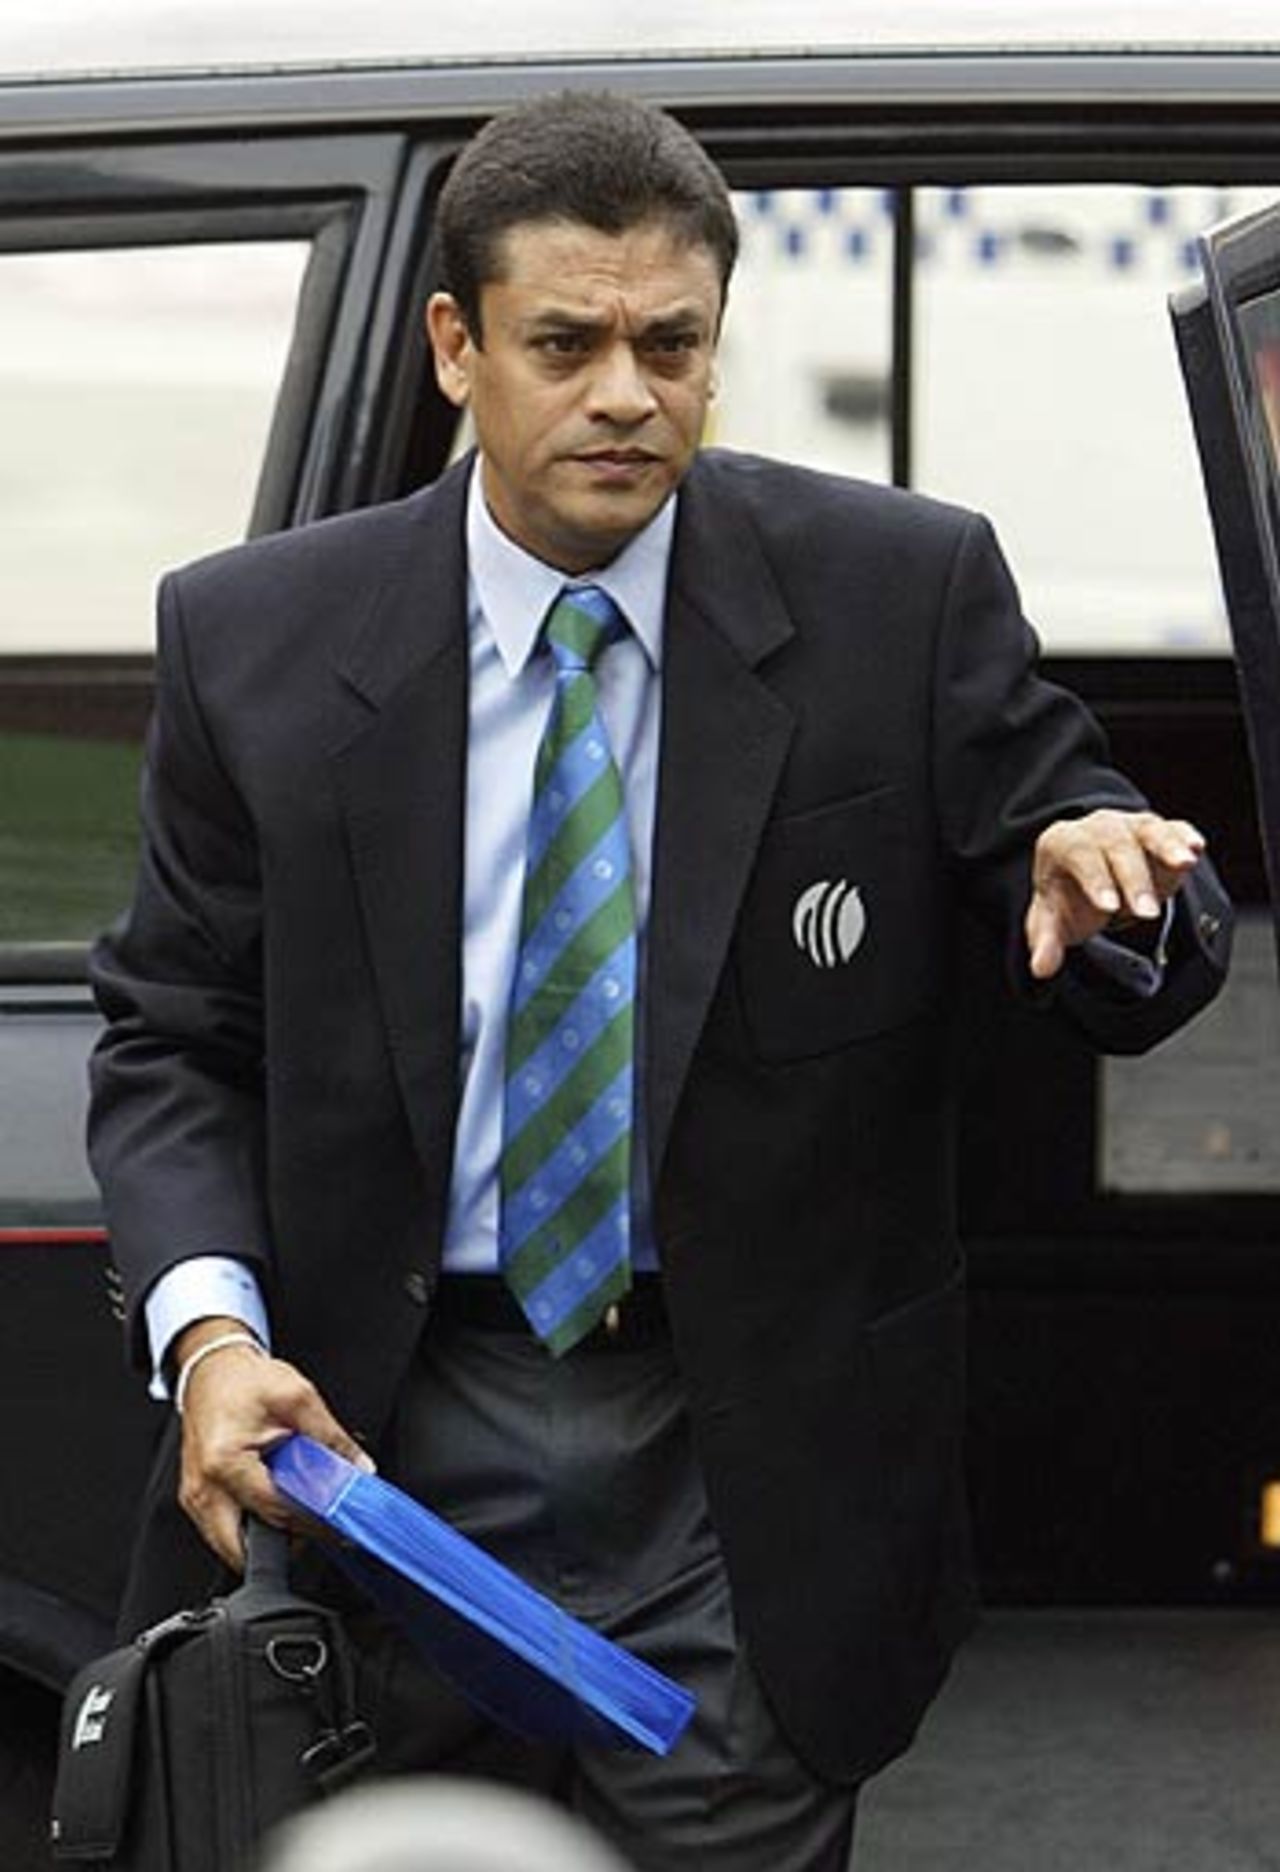 Ranjan Madugalle arrives for the Inzamam-ul-Haq's hearing, London, September 27, 2006